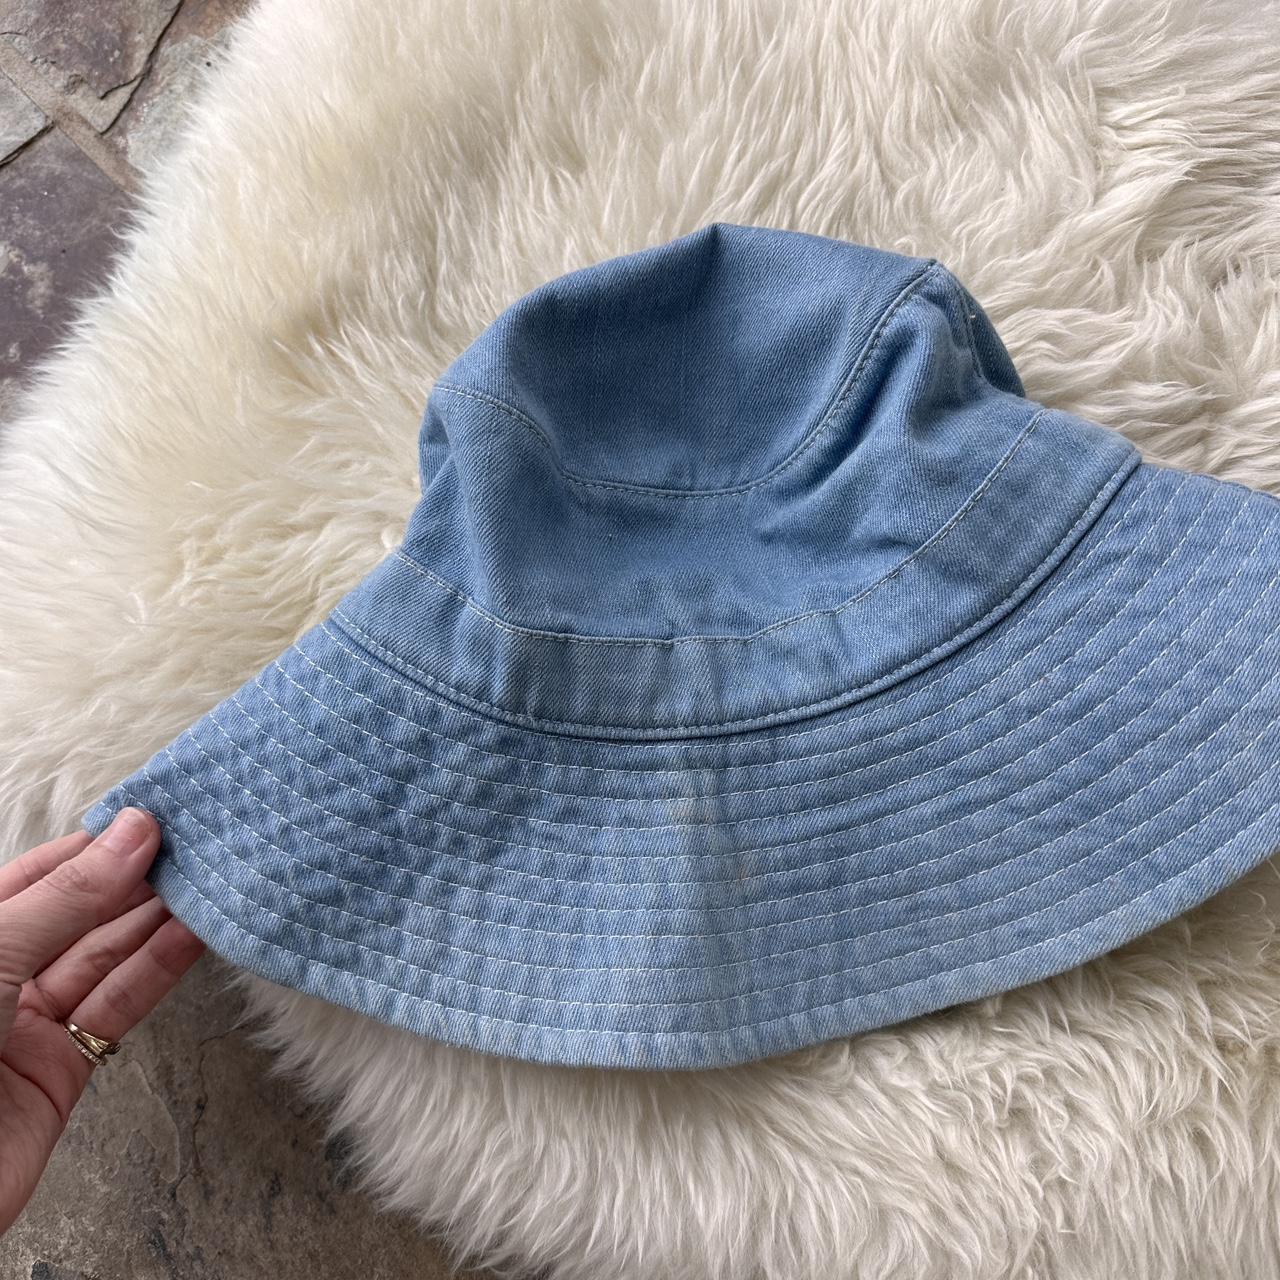 Urban Outfitters Checkered Bucket Hat Cotton Canvas 25th UO-76 Label Blue  Denim | Blue denim, Urban outfitters, Clothes design